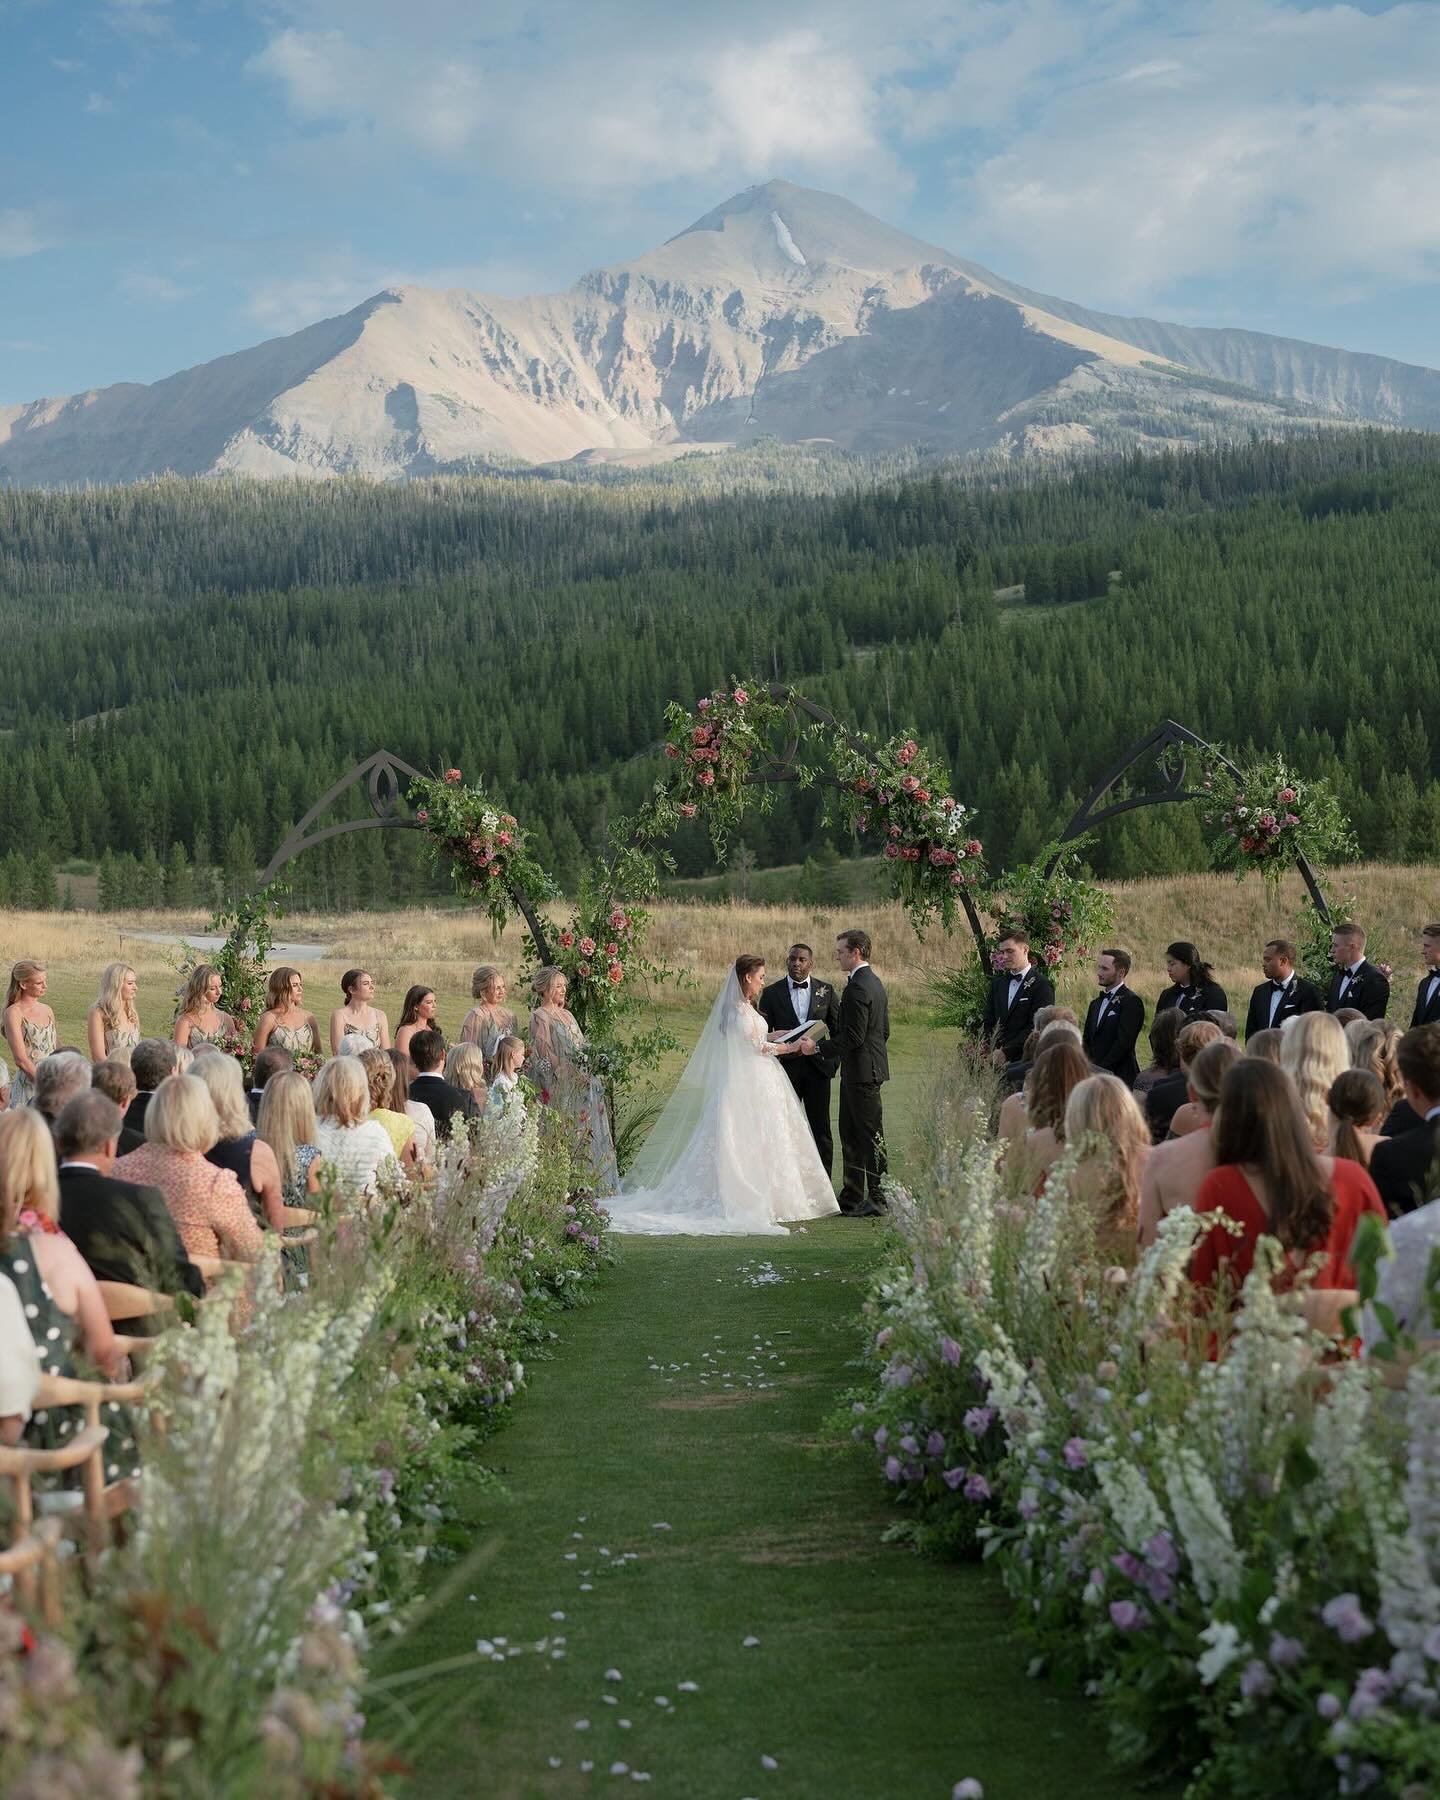 THE VIEW IS GREAT.

Life&rsquo;s a climb, but the views are great&mdash;and this wedding was the epitome of proof. Hues of rosy and lavender blooms traced their way around this celebration, from the altar to the reception. Each detail was steeped in 